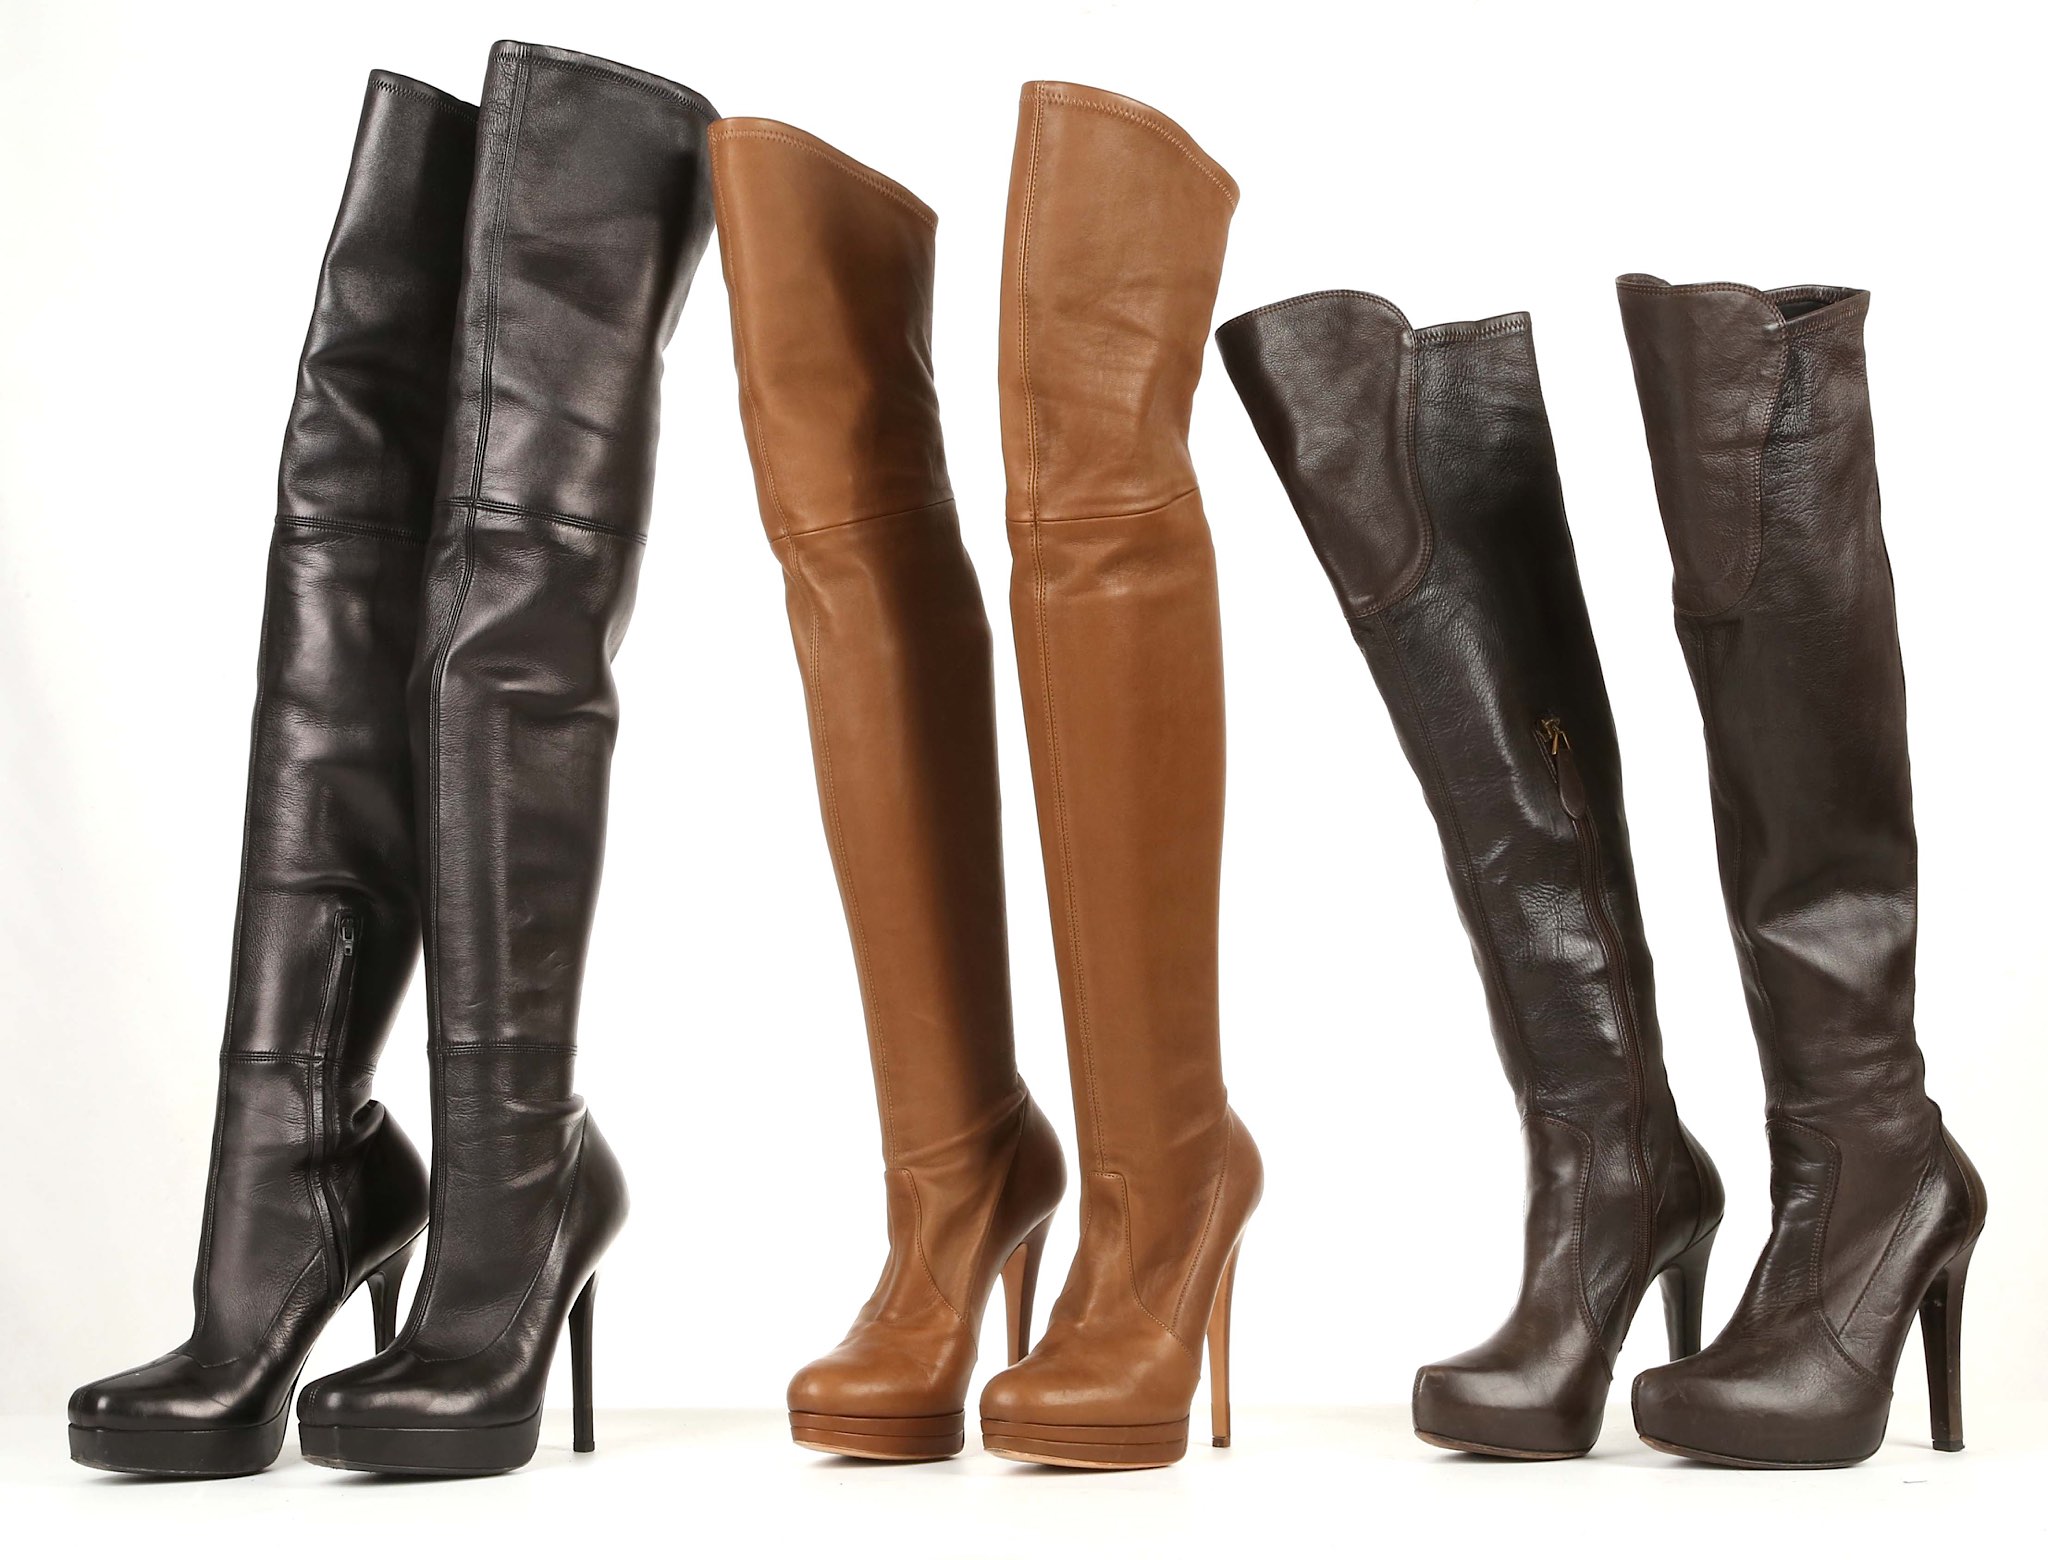 GUCCI THIGH HIGH BLACK LEATHER BOOTS, stiletto heel, size 38, and a pair of brown Casadei boots - Image 2 of 8